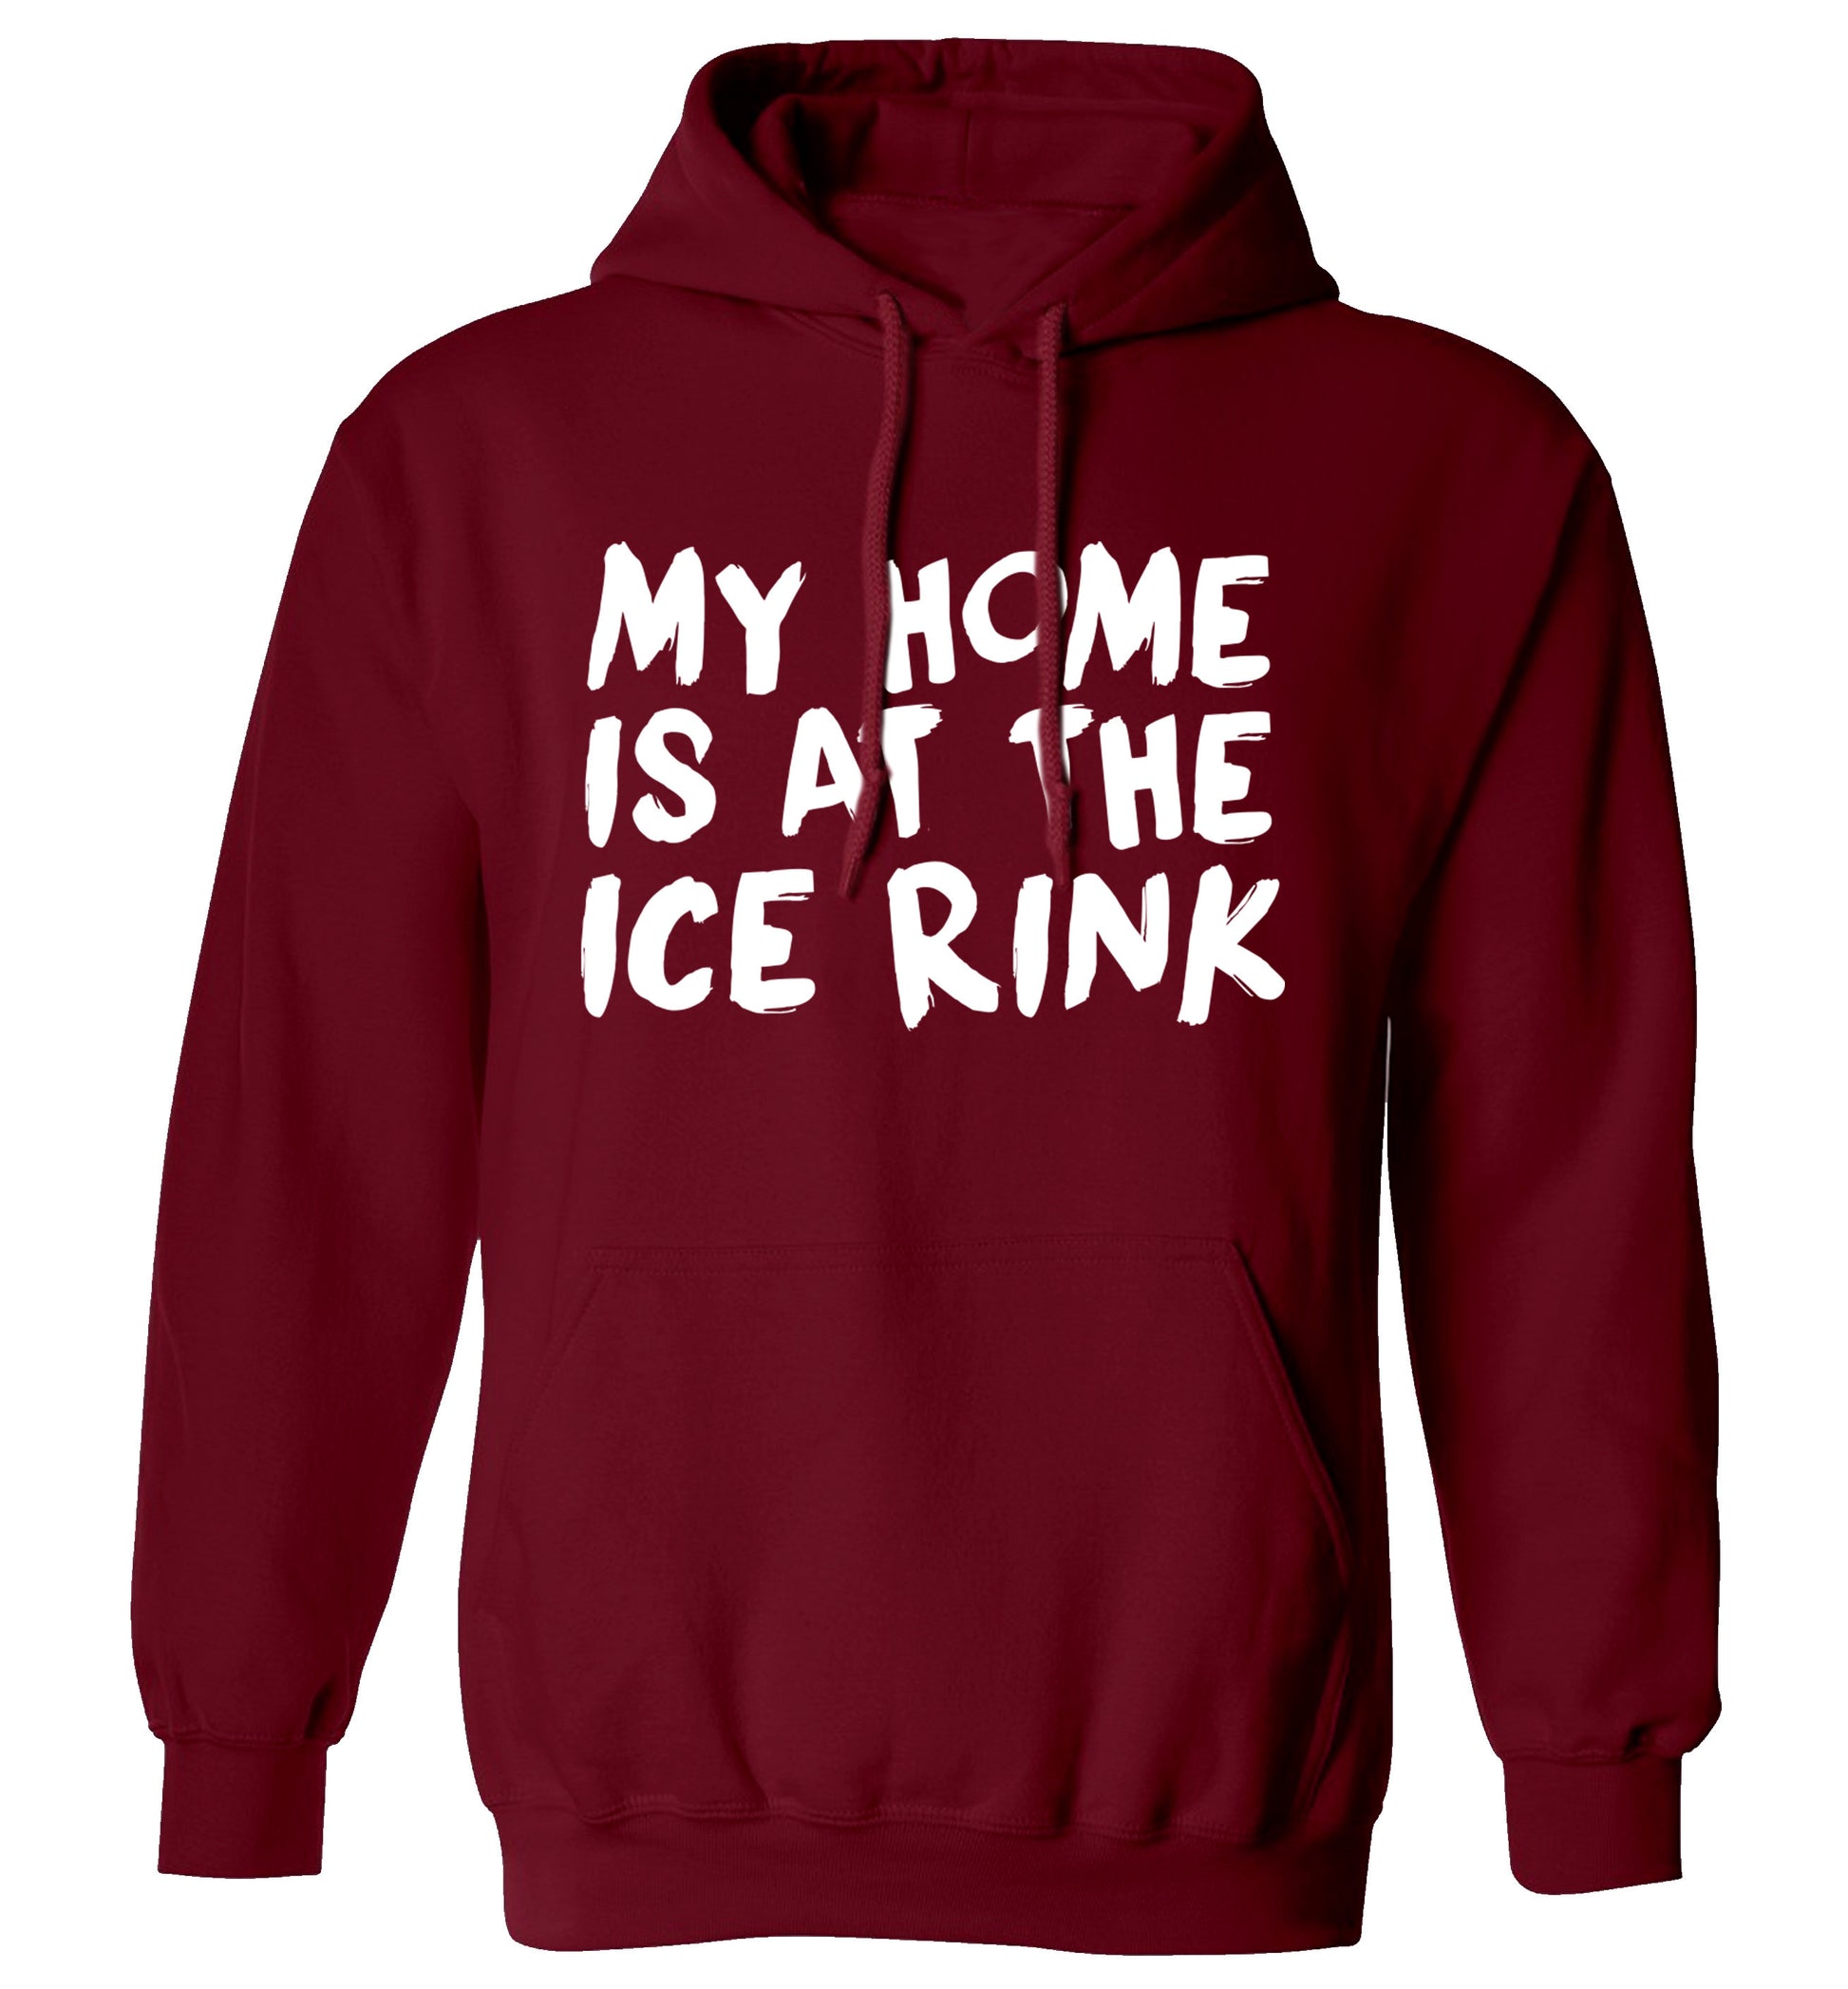 My home is at the ice rink adults unisex maroon hoodie 2XL